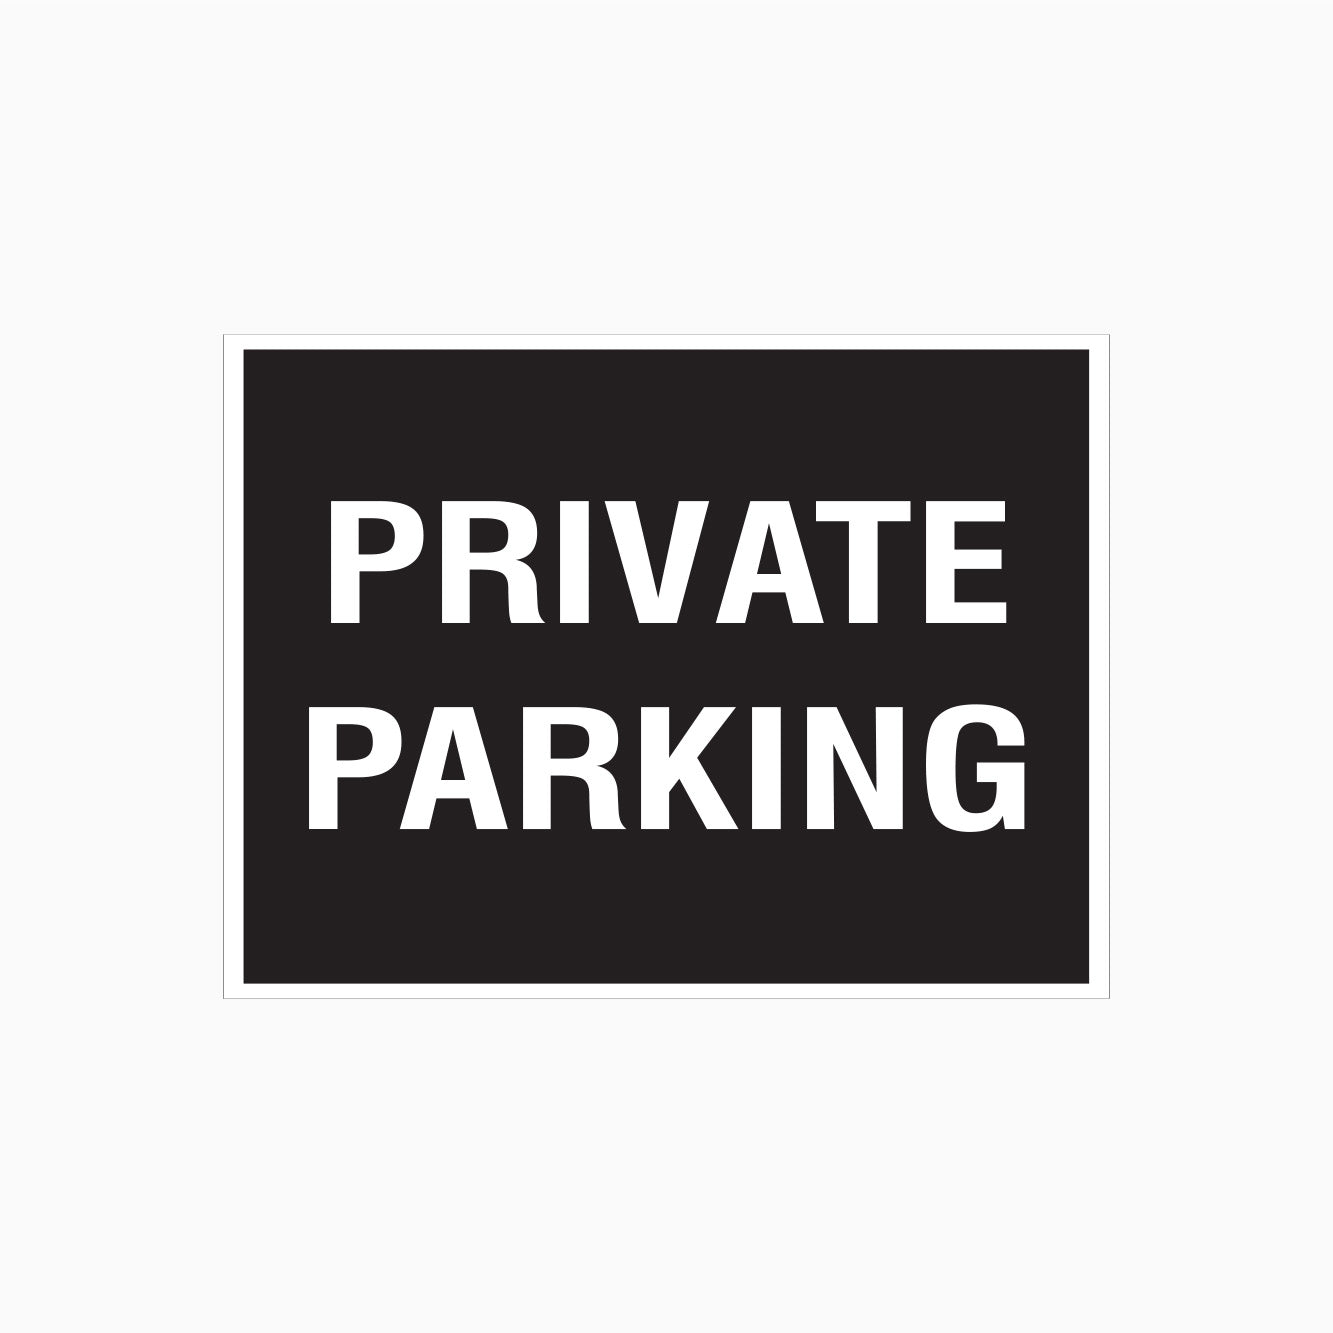 PRIVATE PARKING SIGN - PARKING AND NO PARKING SIGNS IN AUSTRALIA FROM GET SIGNS